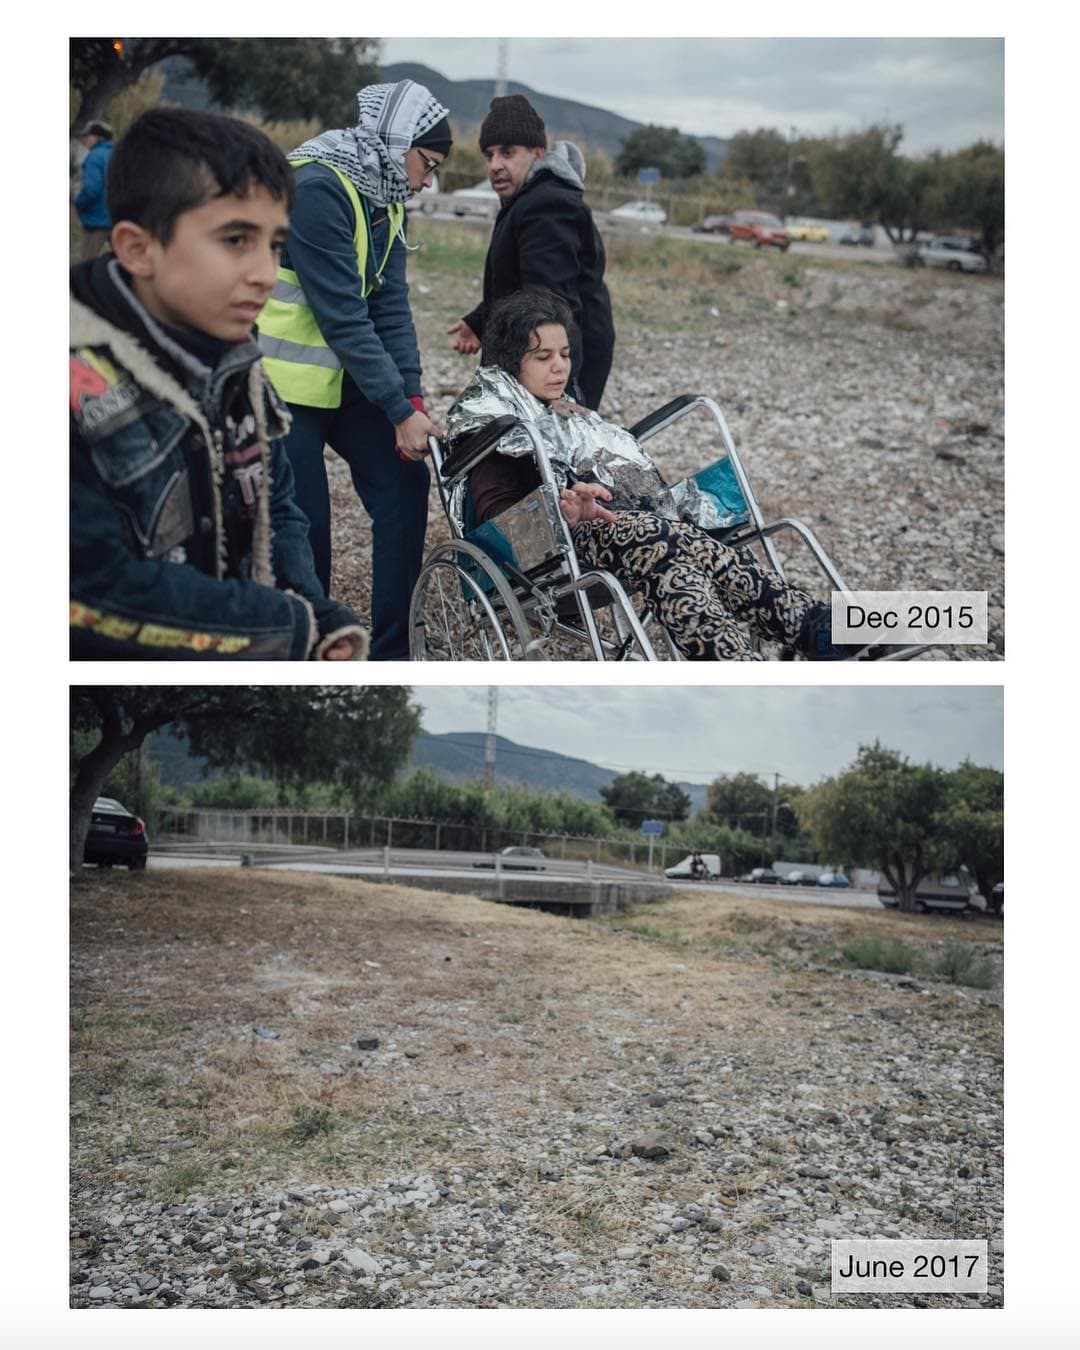 Fascinating before and after images of refugee crisis epicentre